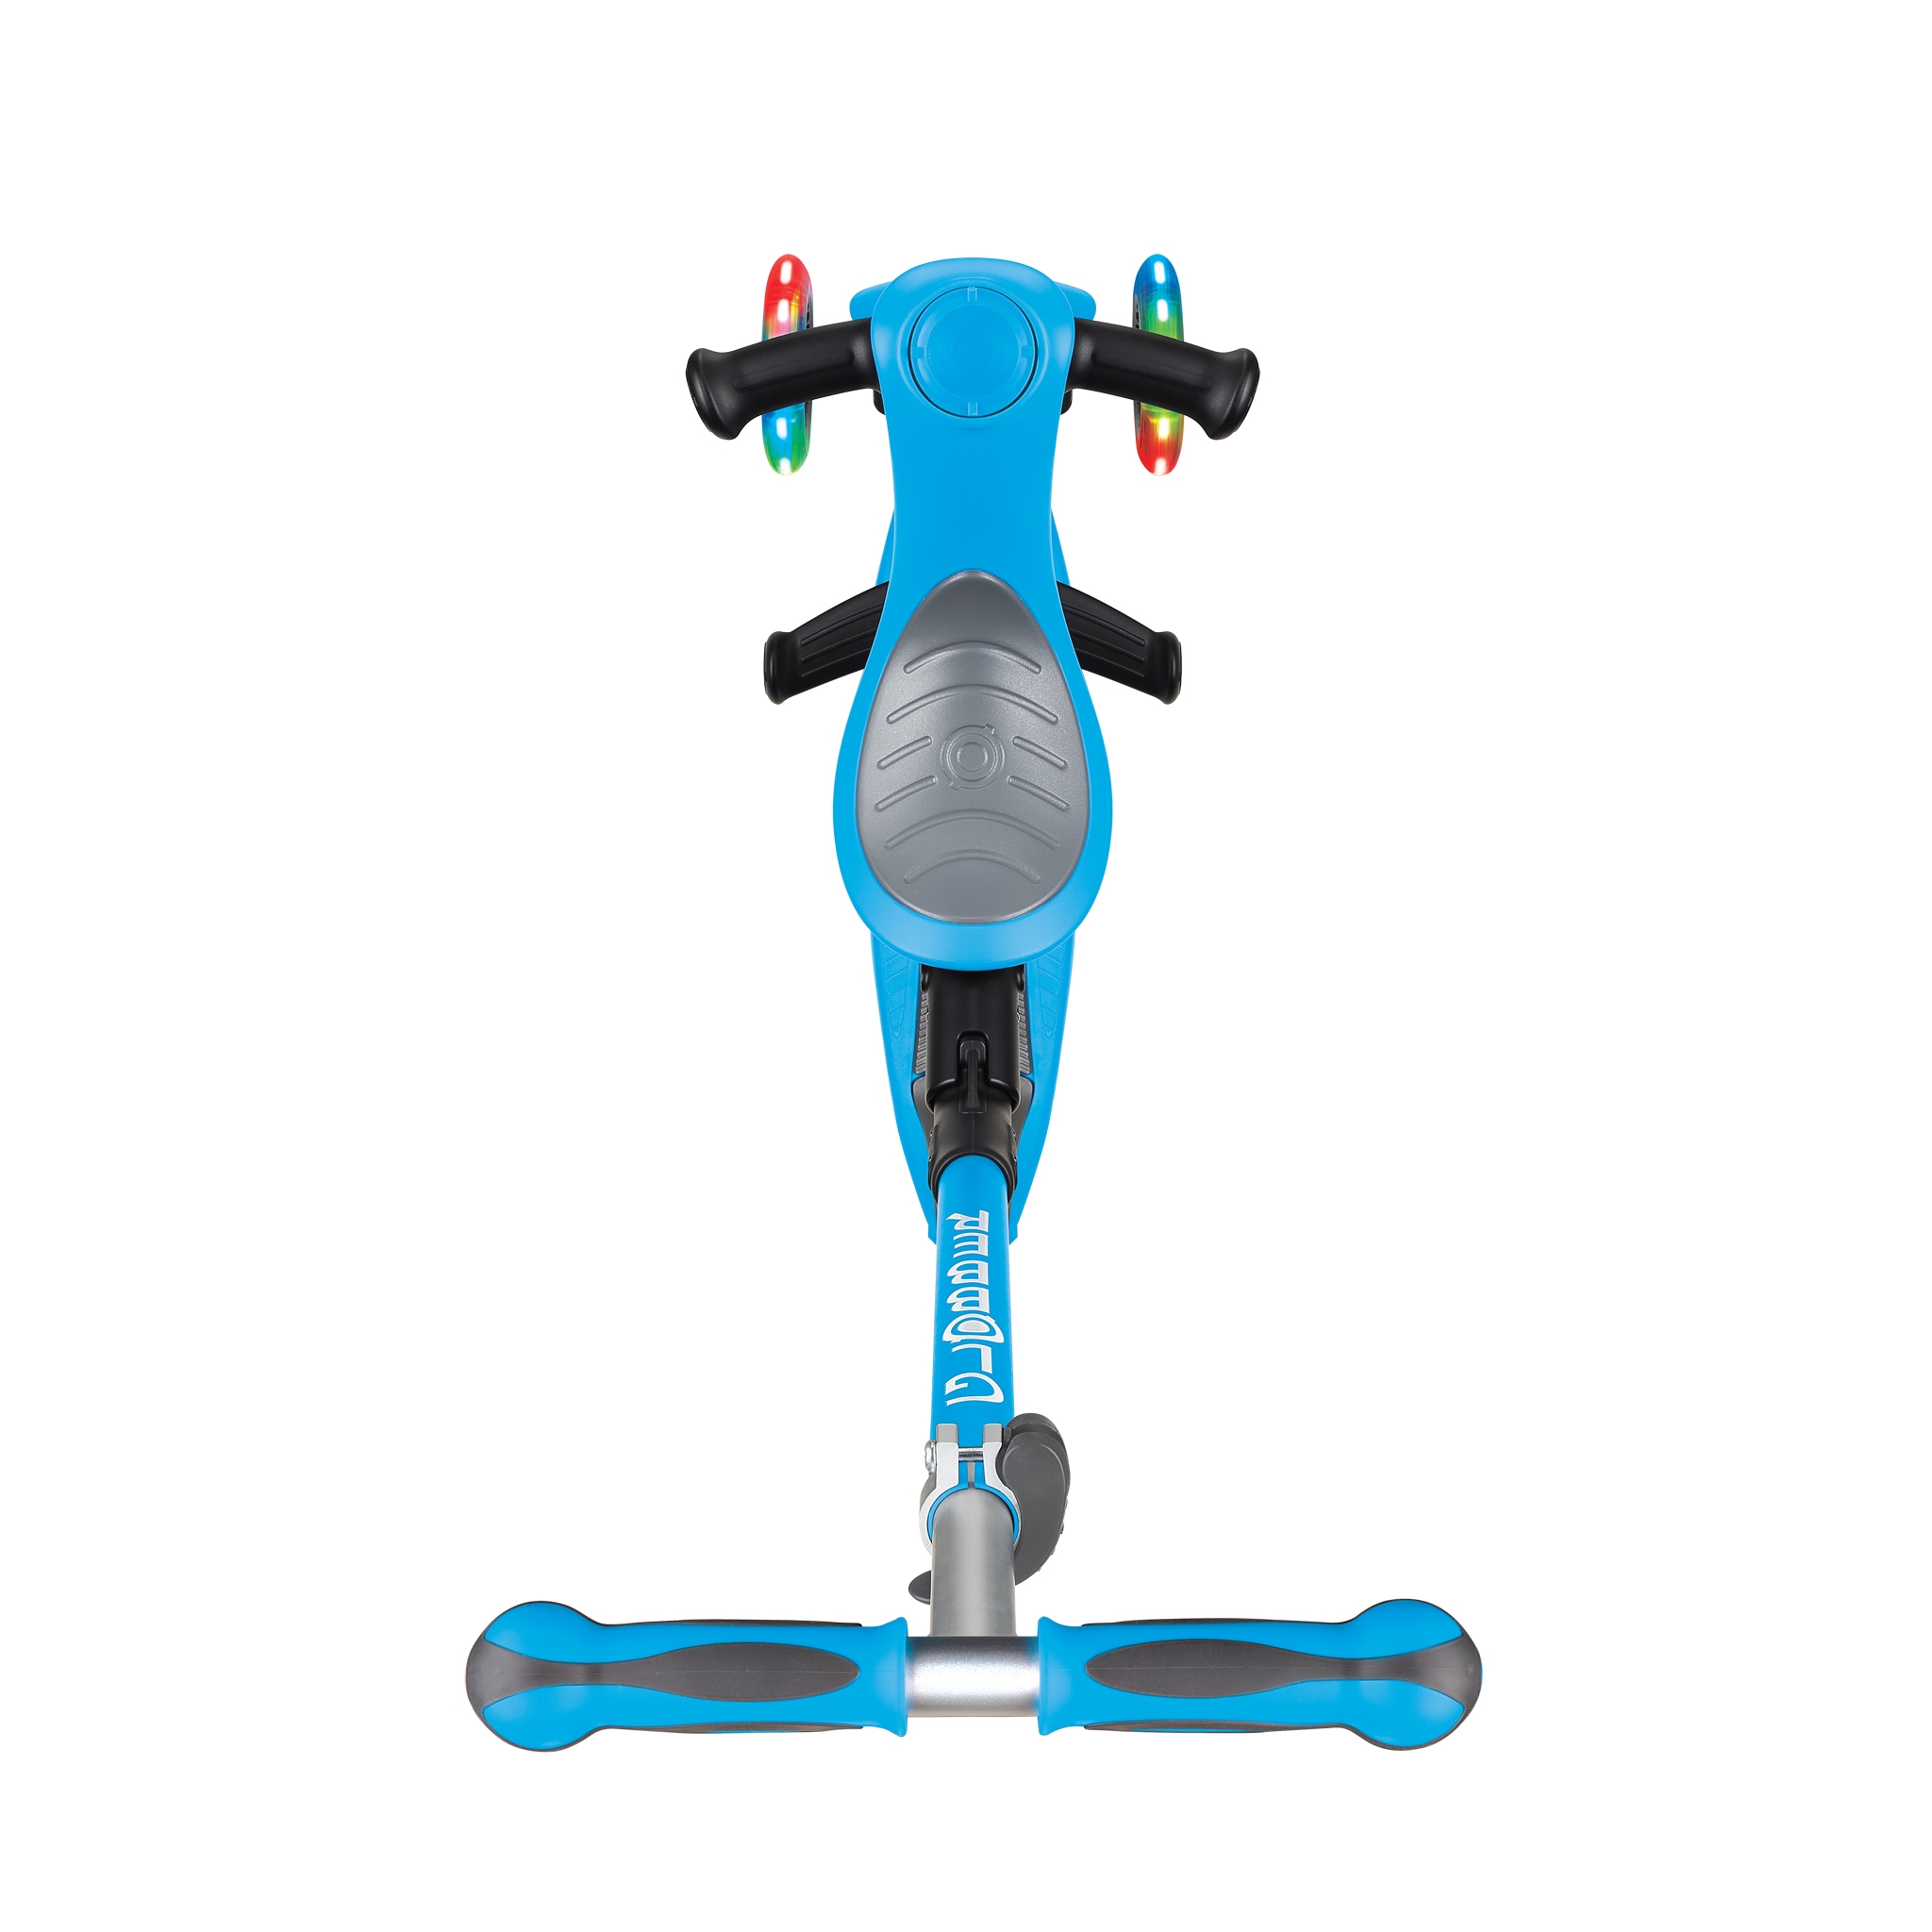 GO-UP-DELUXE-LIGHTS-ride-on-walking-bike-scooter-with-light-up-wheels-and-extra-wide-3-height-adjustable-seat-sky-blue 2